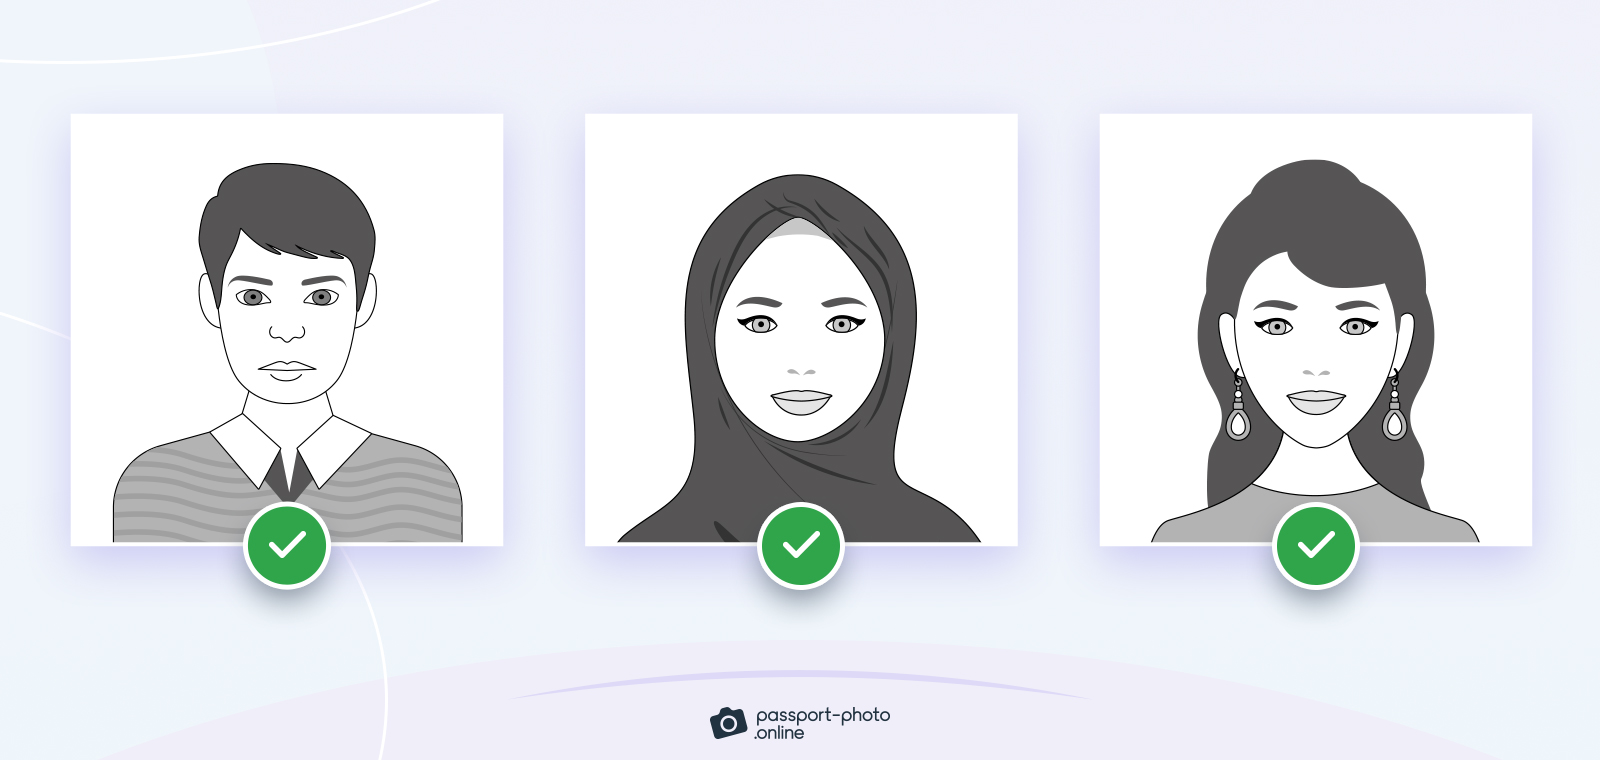 US passport photo examples of appropriate dress code.